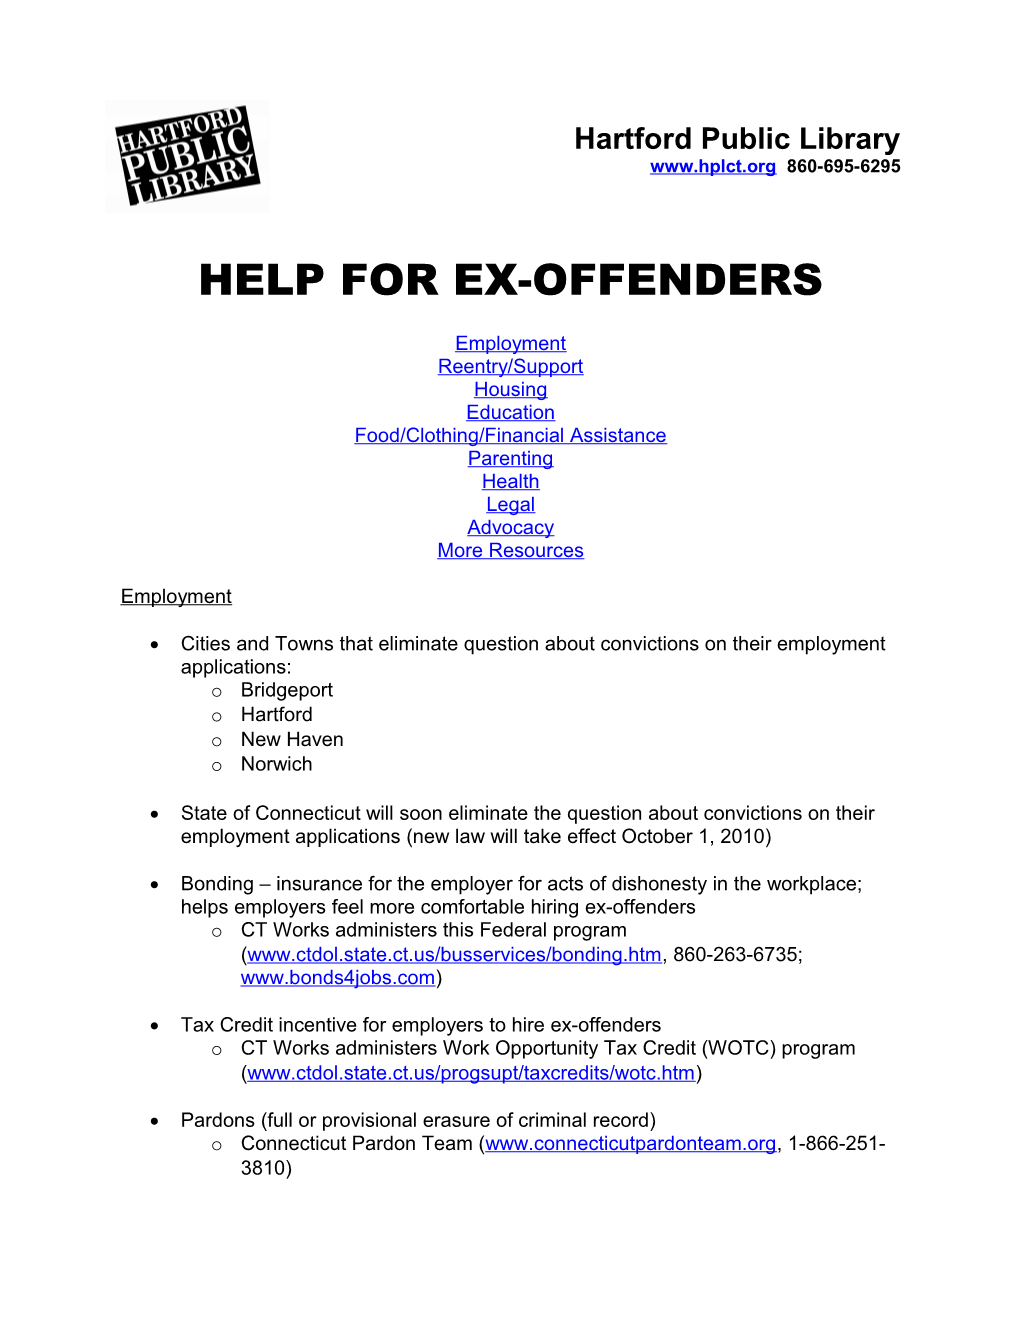 Help for Ex-Offenders